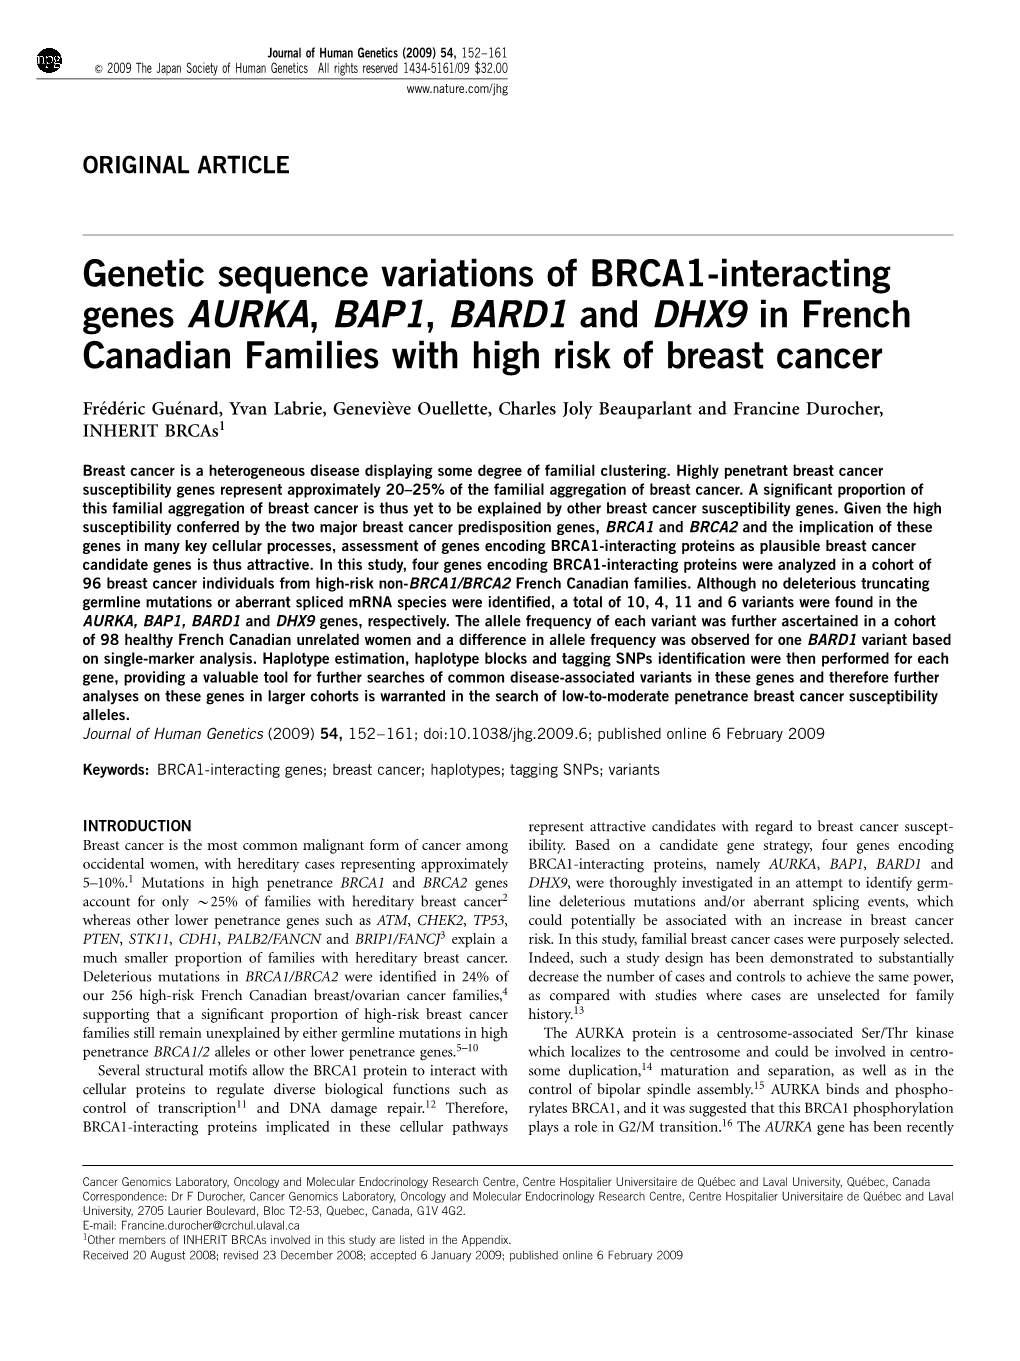 Genetic Sequence Variations of BRCA1-Interacting Genes AURKA, BAP1, BARD1 and DHX9 in French Canadian Families with High Risk of Breast Cancer